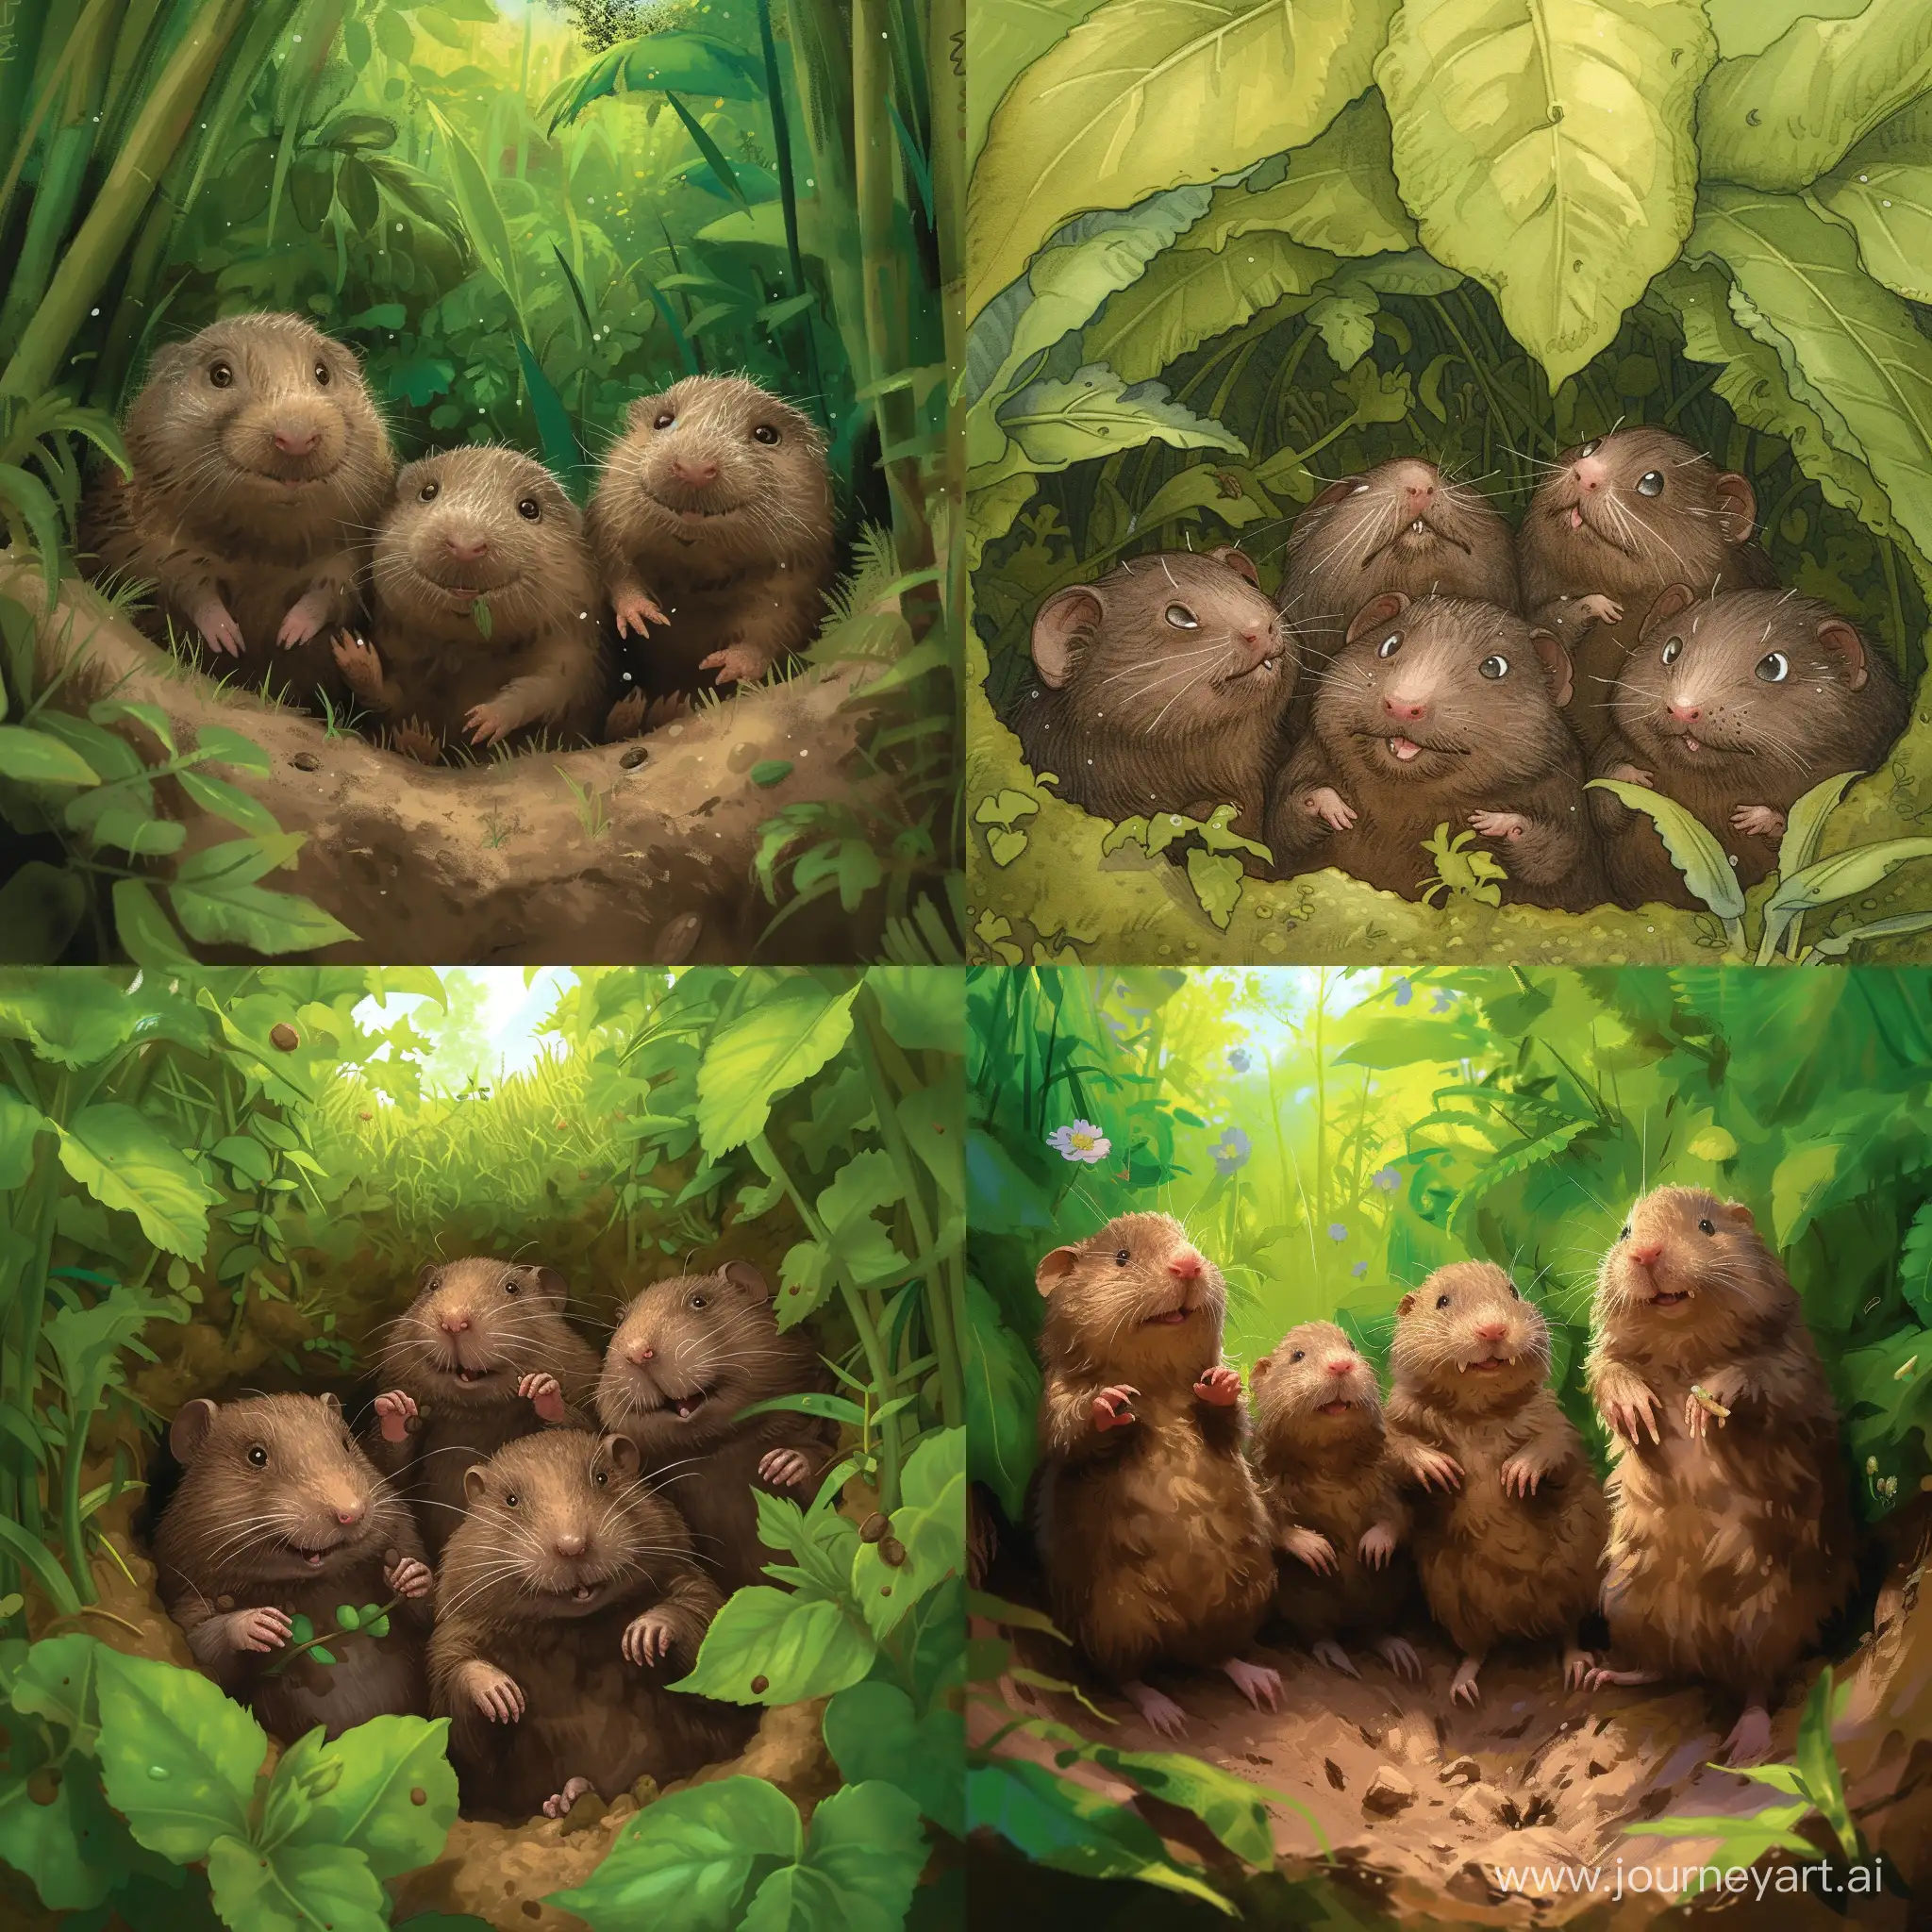 Curious-Moles-Exploring-Underground-in-Lush-Green-Forest